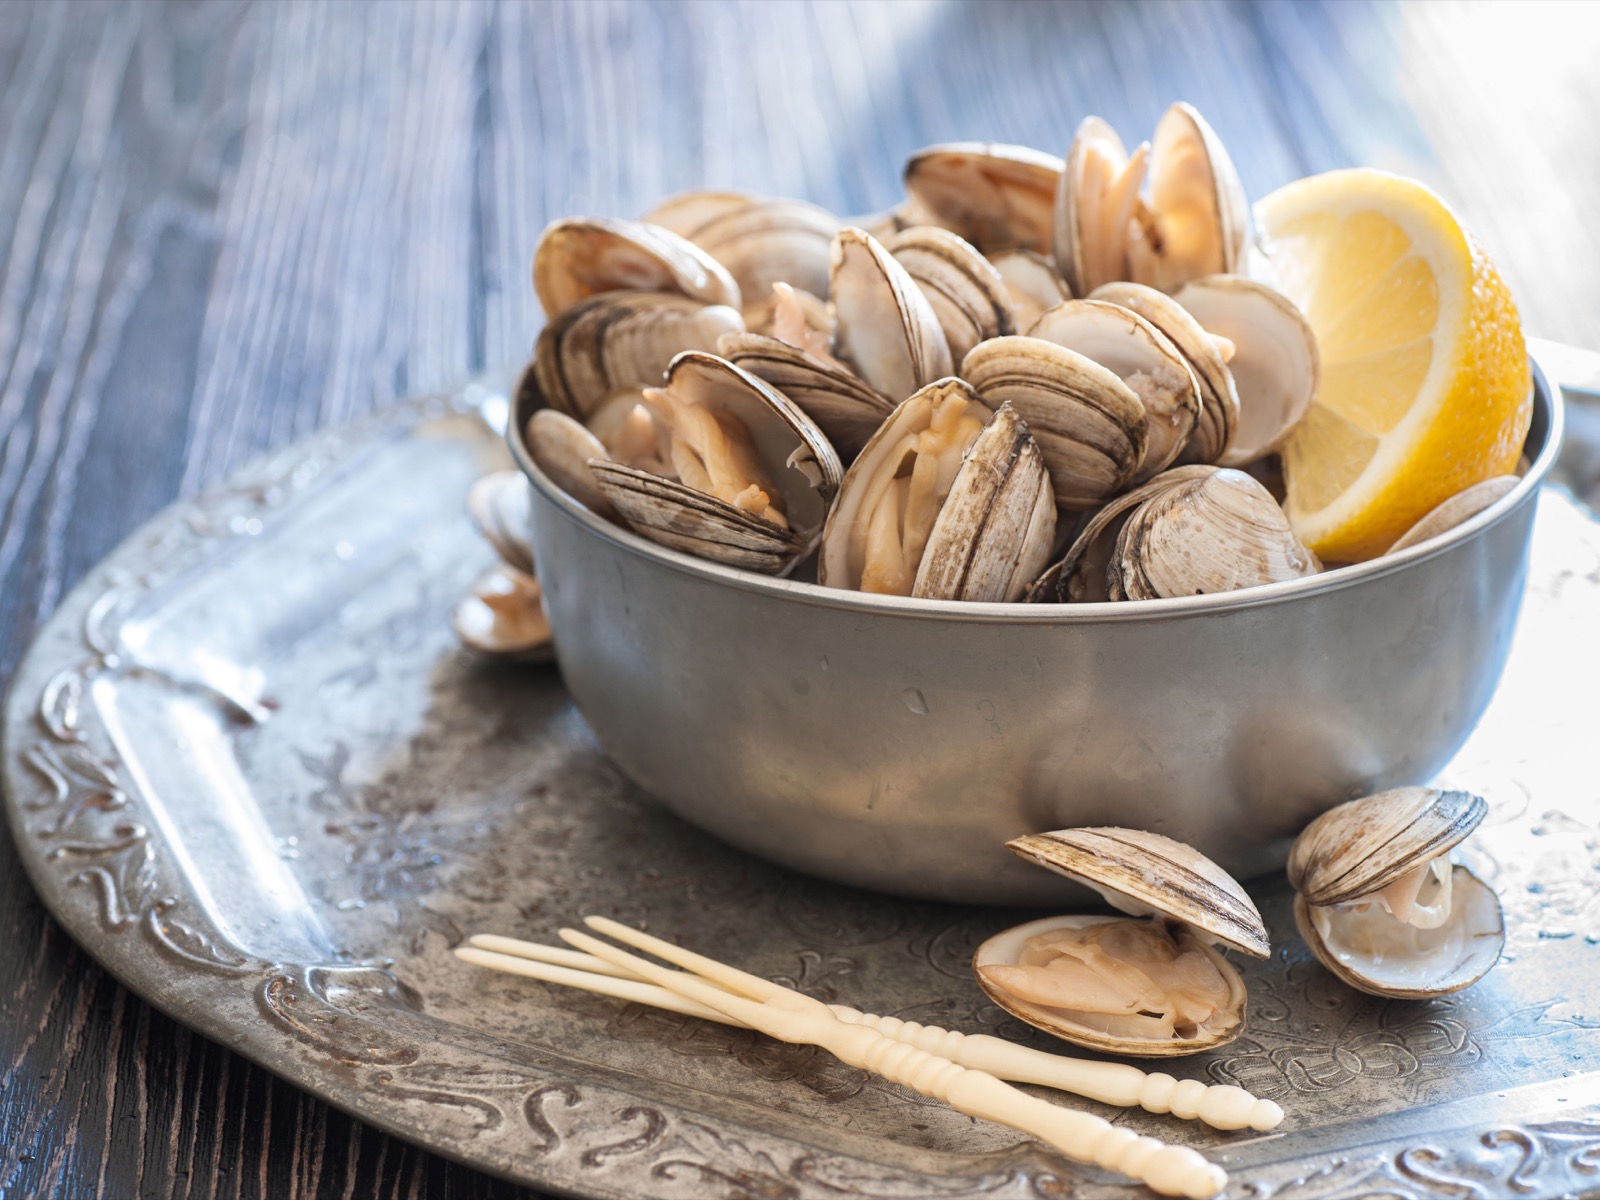 If You've Eaten 20 of Foods, Then You're Truly Obsessed… Quiz Clams